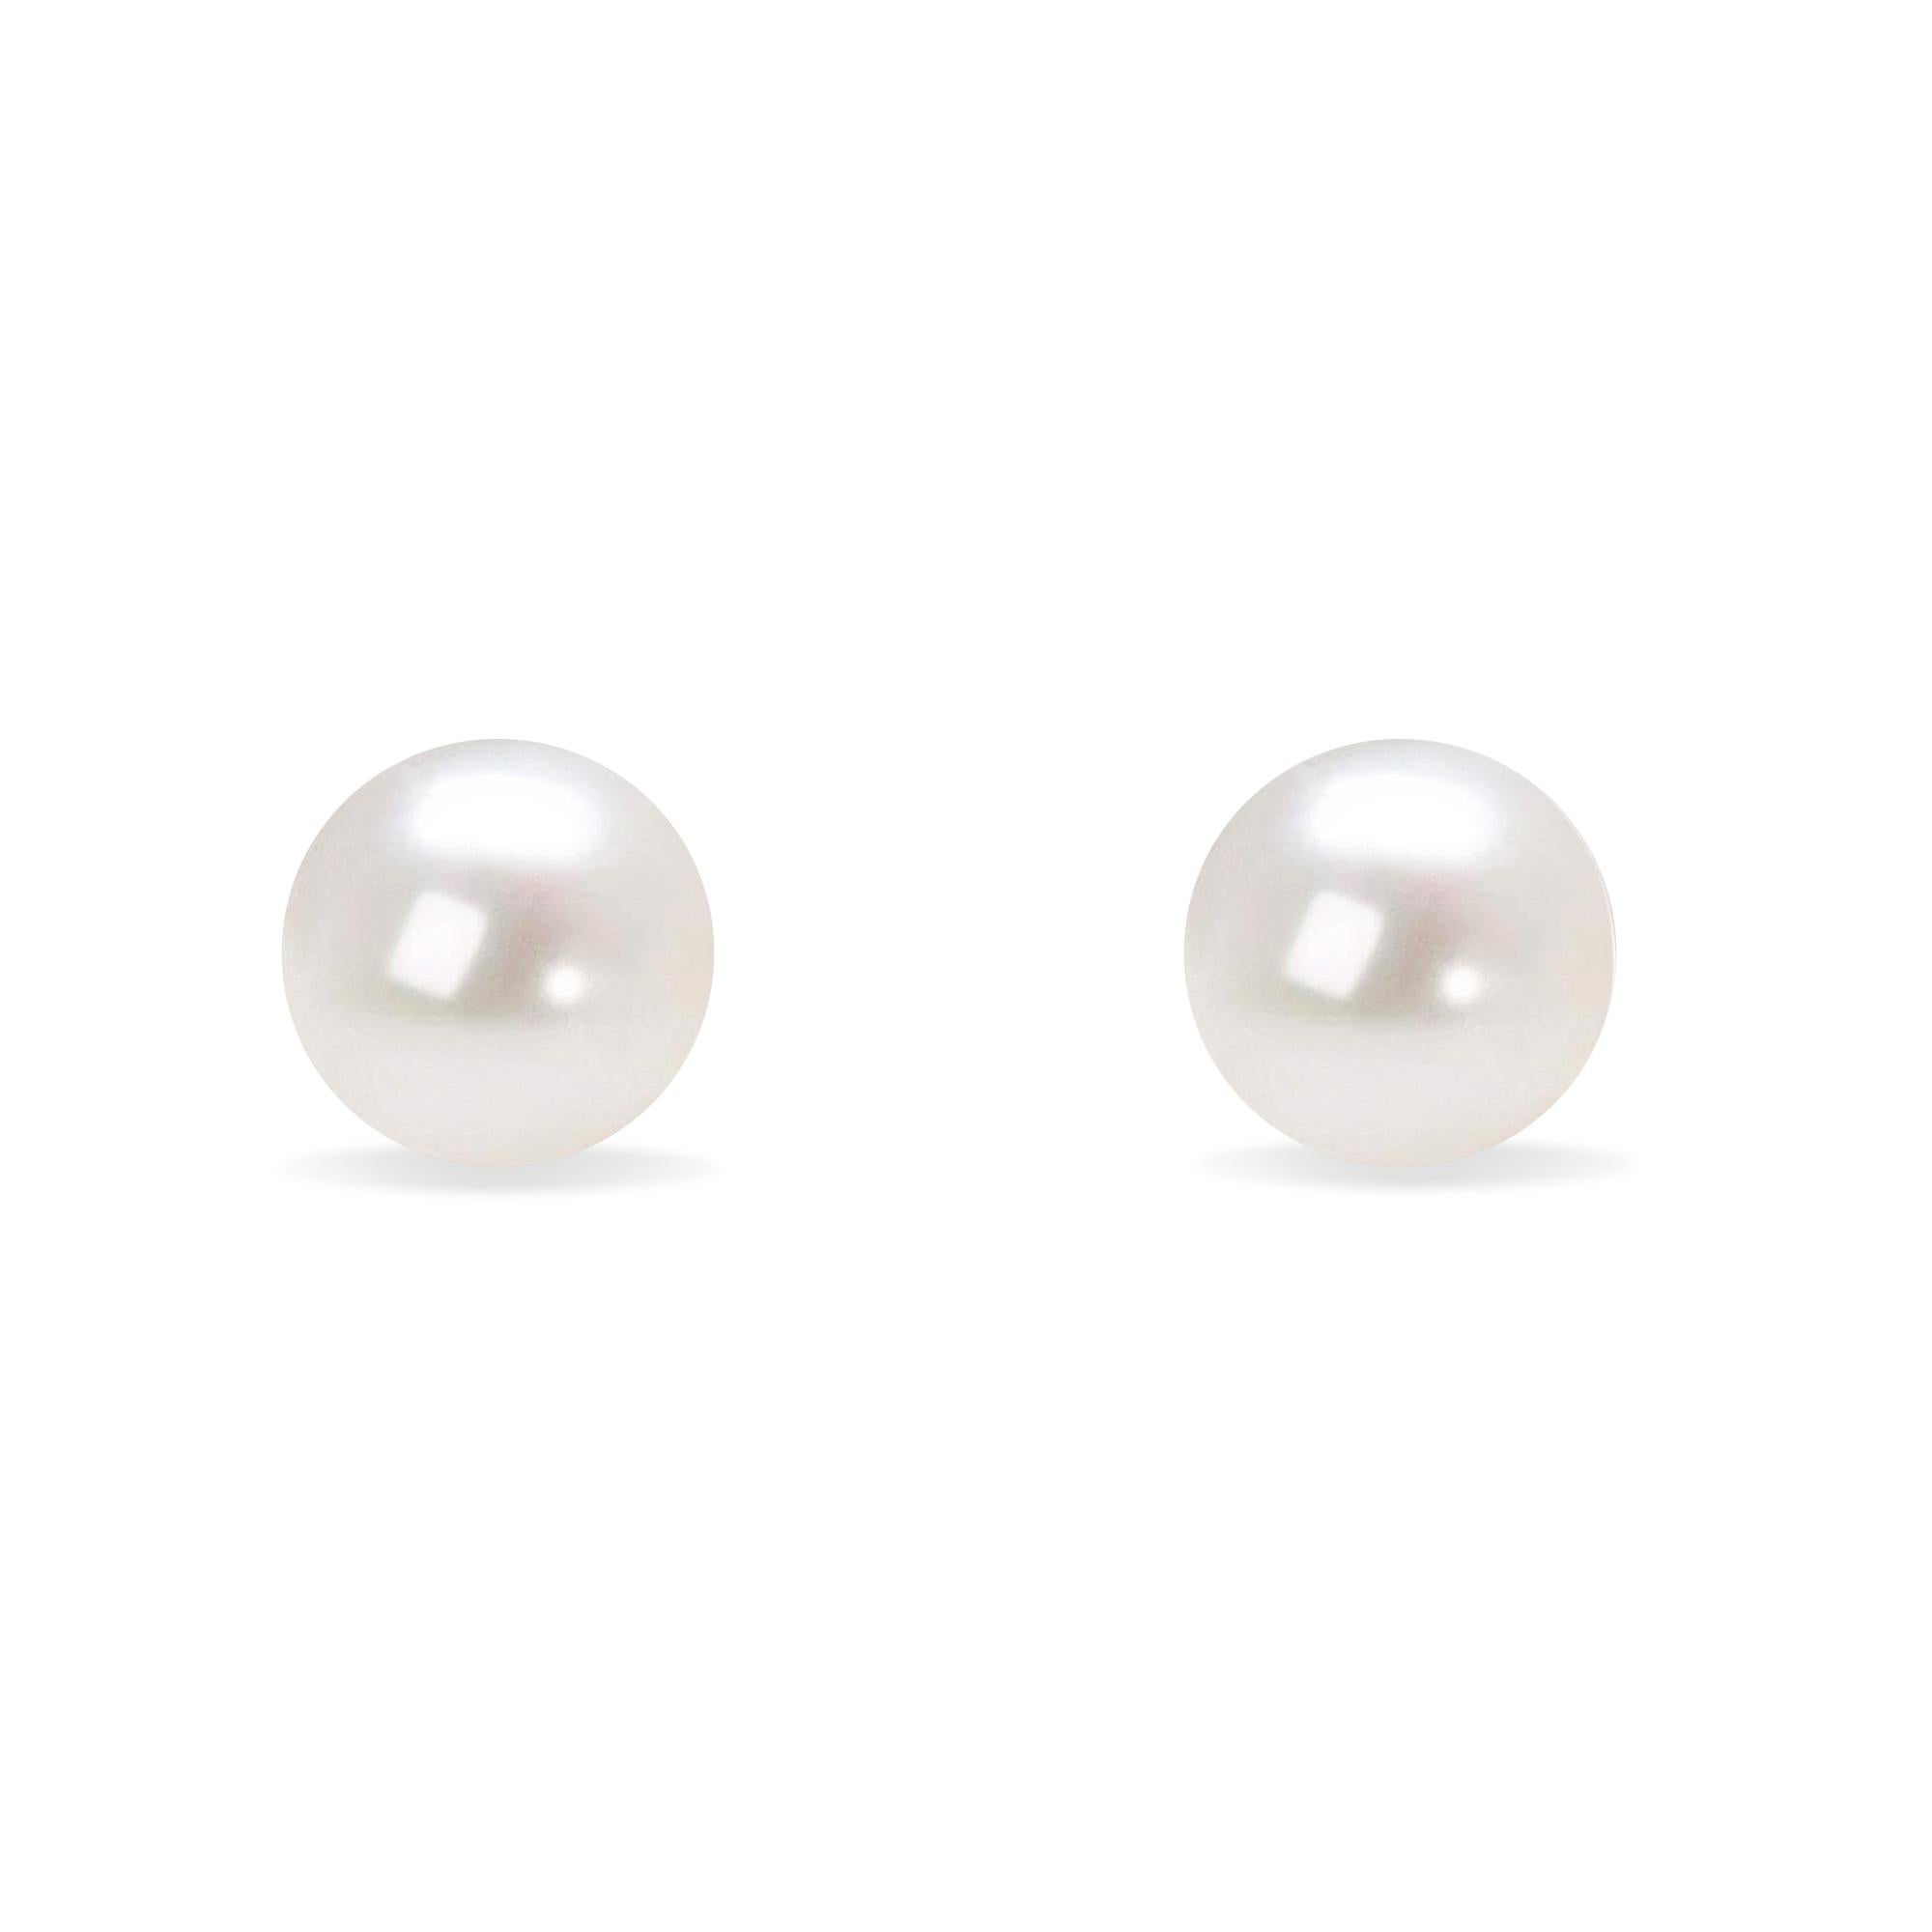 Contemporary 14K White Gold Round Freshwater Akoya Cultured Pearl Stud Earrings AAA+ Quality